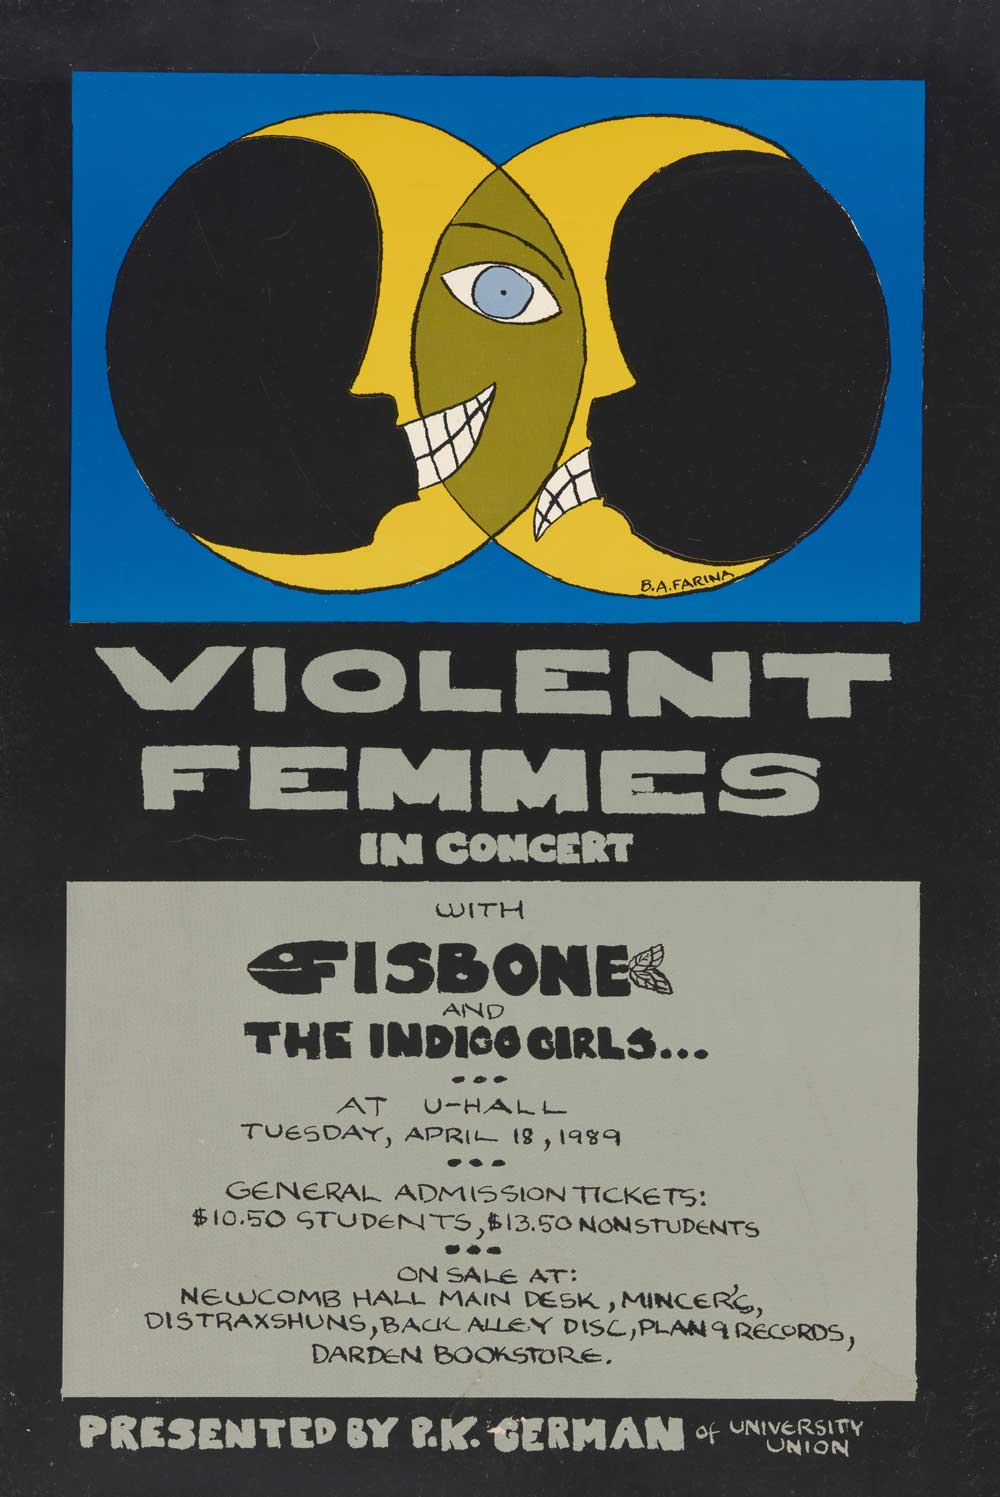 Homemade concert poster from when Violent Femmes visited UVA in the 1980s